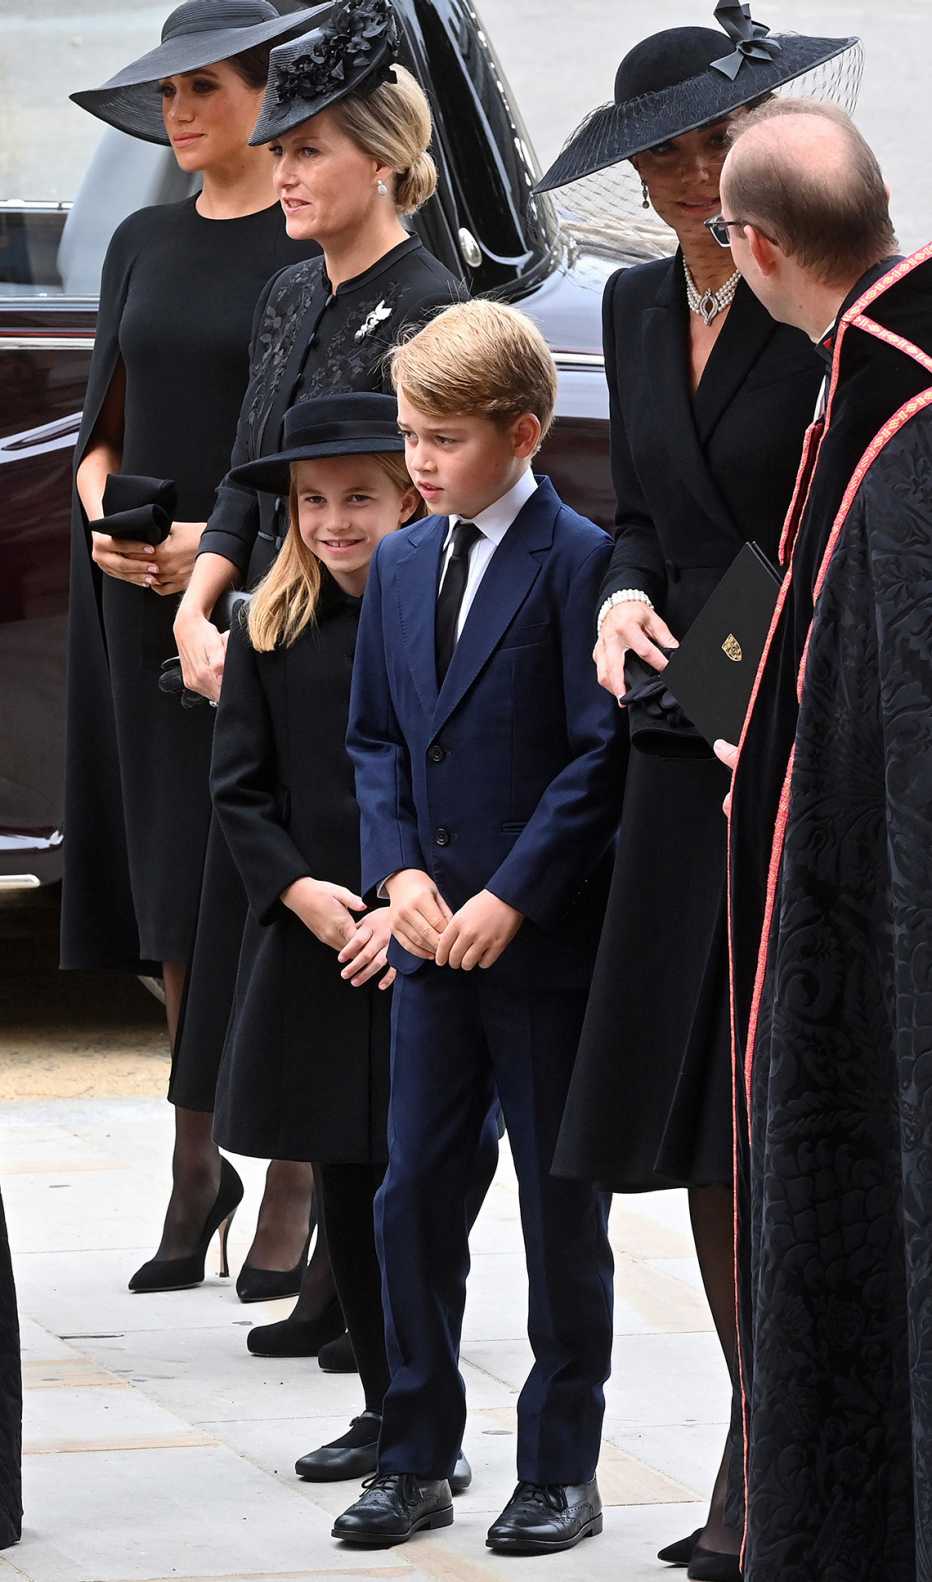 Meghan, Duchess of Sussex, Britain's Sophie, Countess of Wessex, Britain's Princess Charlotte of Wales, Britain's Prince George of Wales and Britain's Catherine, Princess of Wales arrive at Westminster Abbey in London on September 19, 2022, for the State Funeral Service for Britain's Queen Elizabeth II